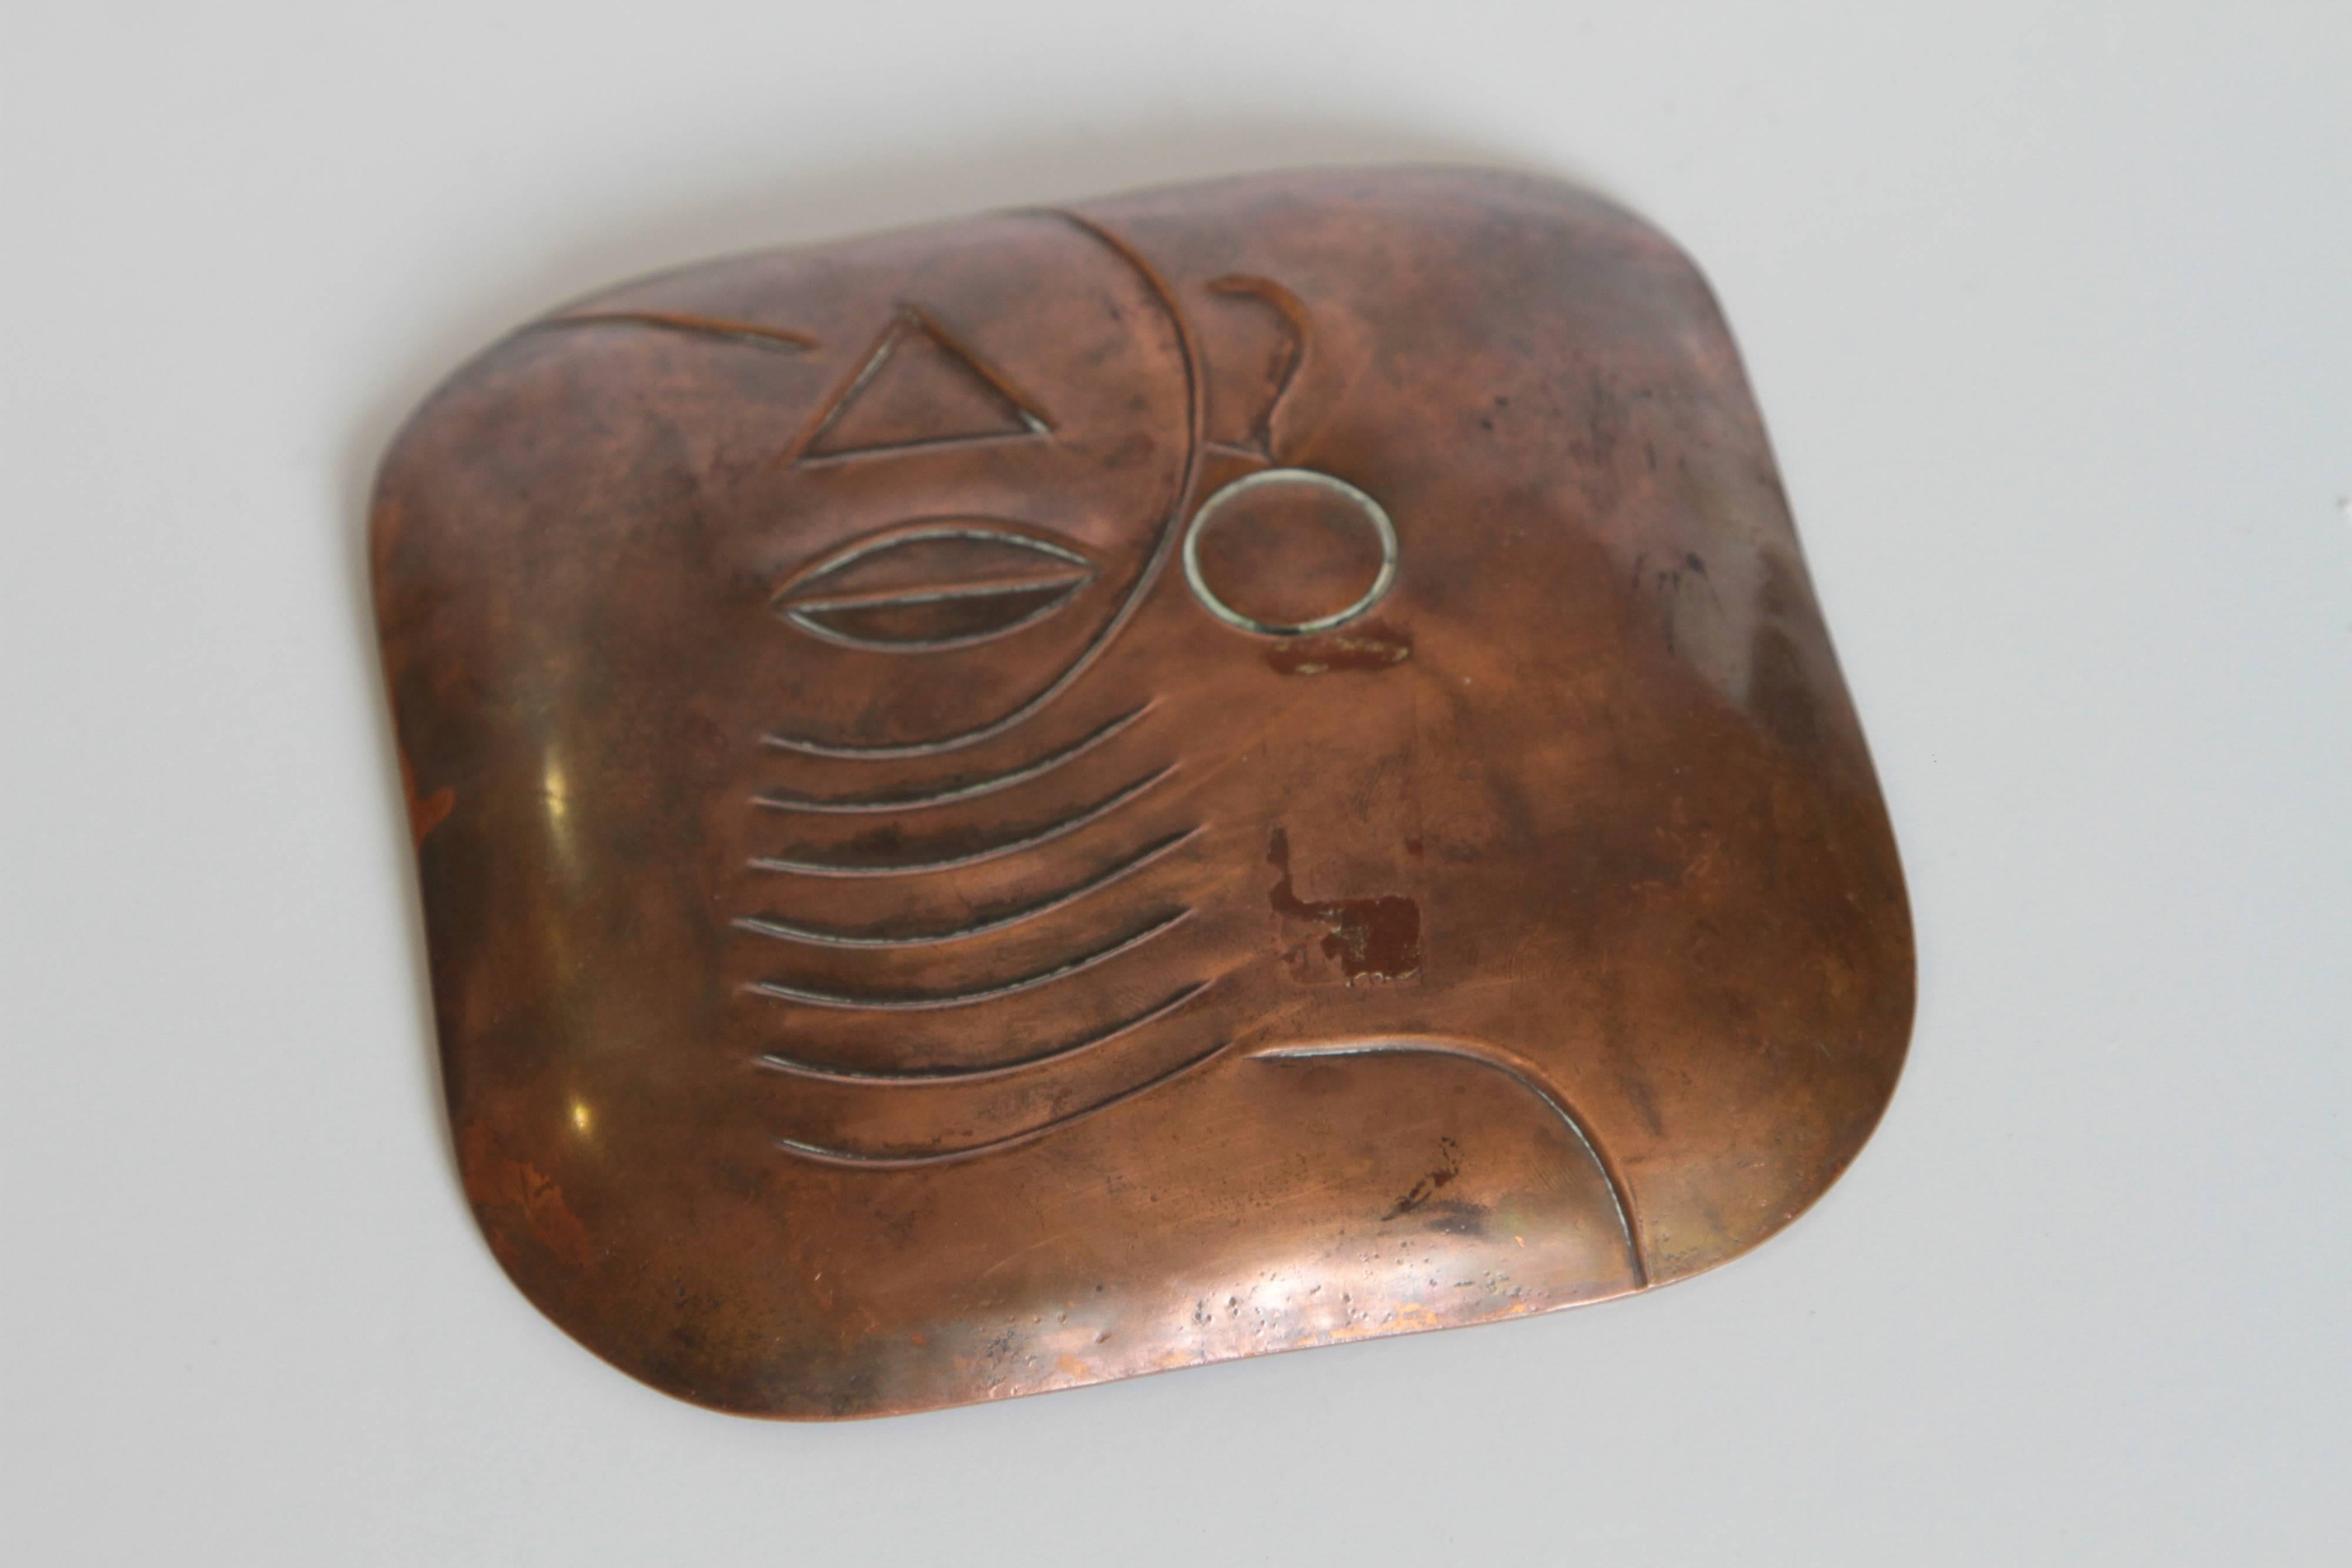 Hammered Midcentury Art Deco Original Rebajes Native Hand-Wrought Copper Tray, Patinated